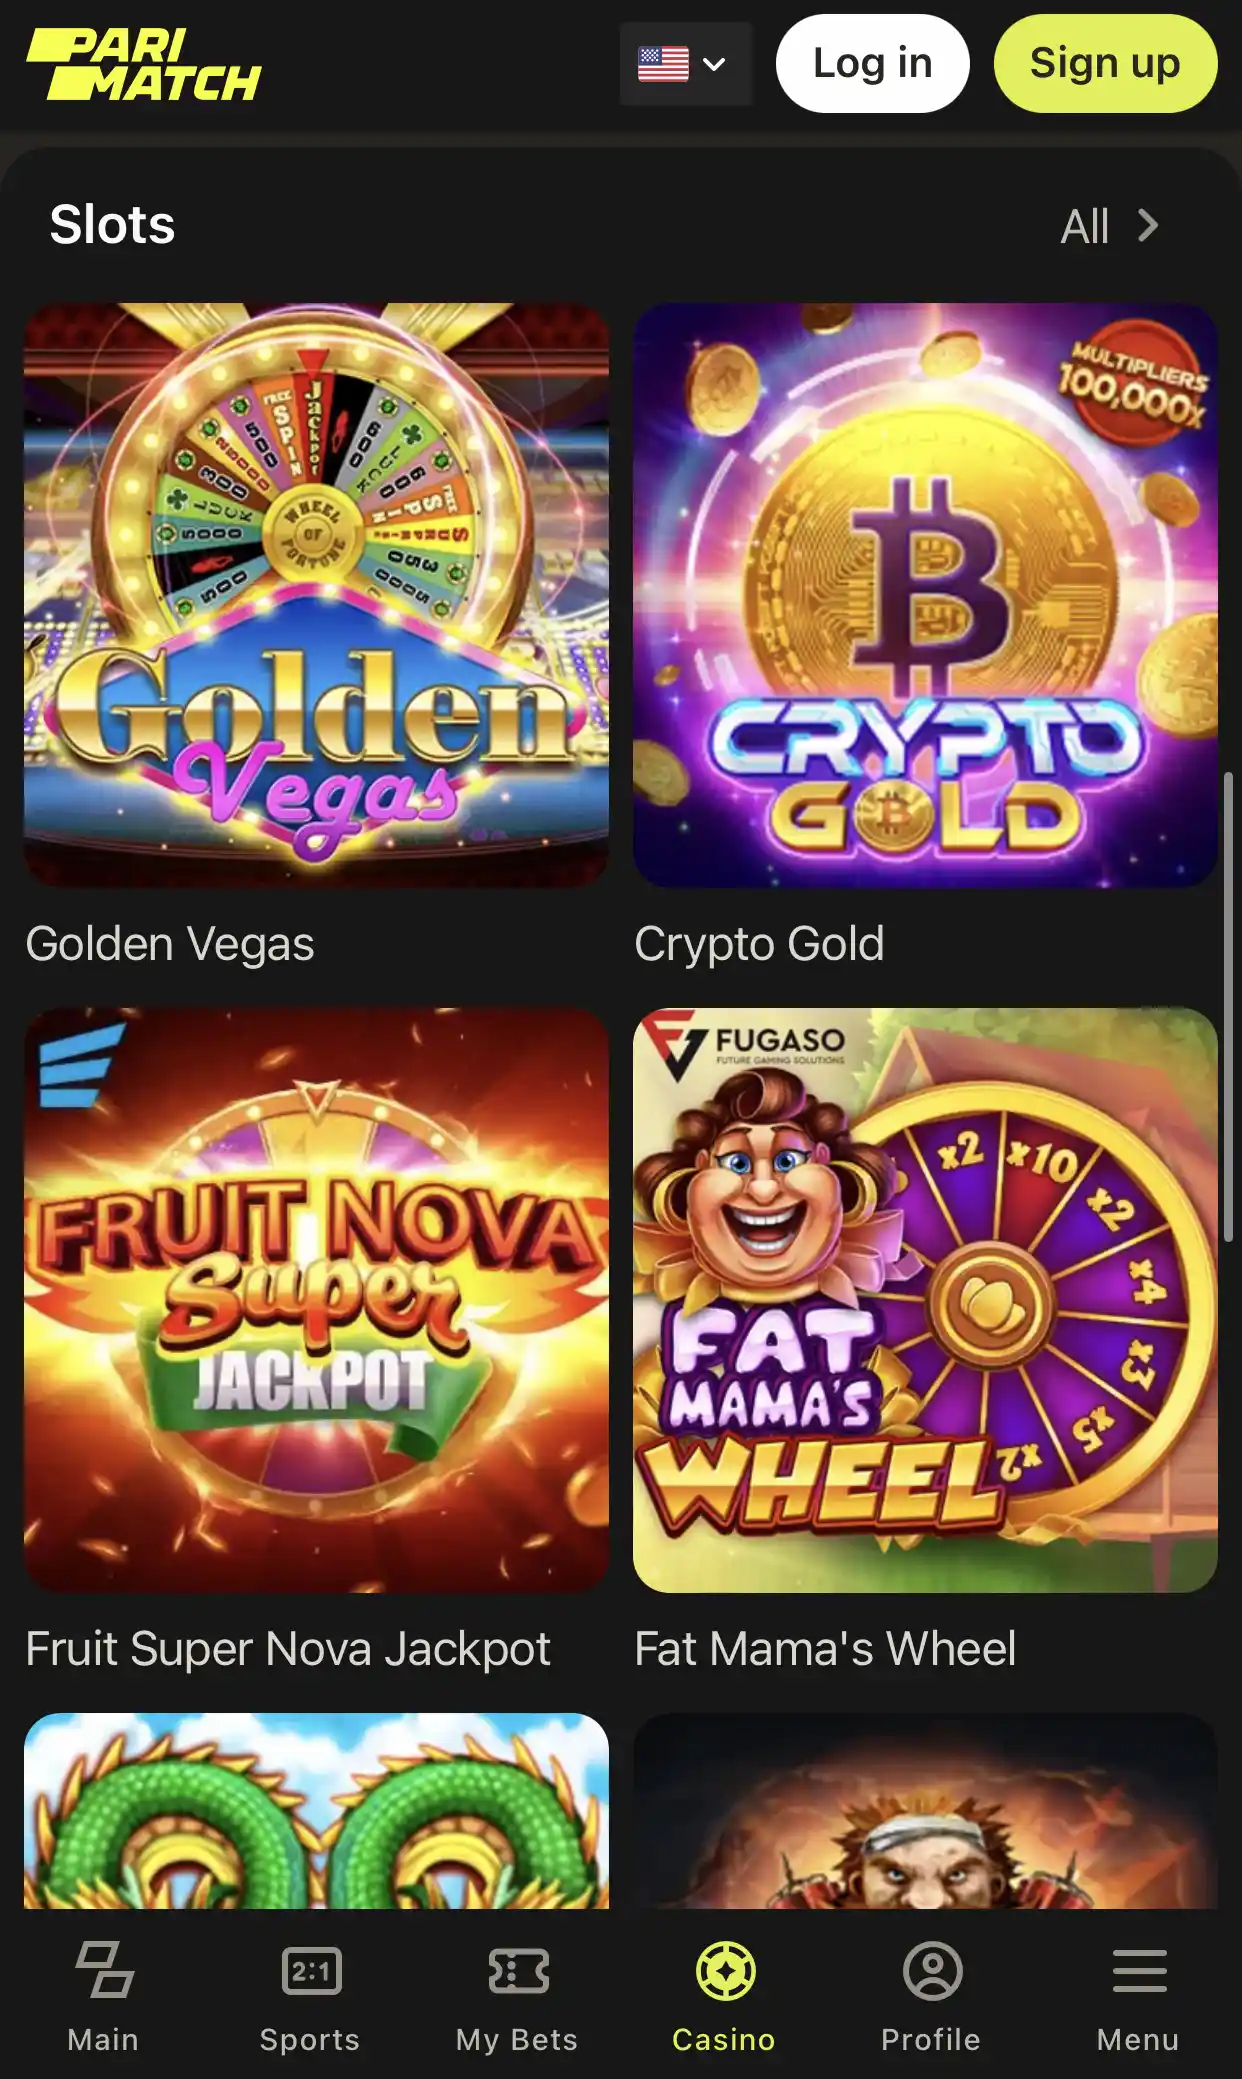 Go to the slots section and choose your favorite game and start winning.